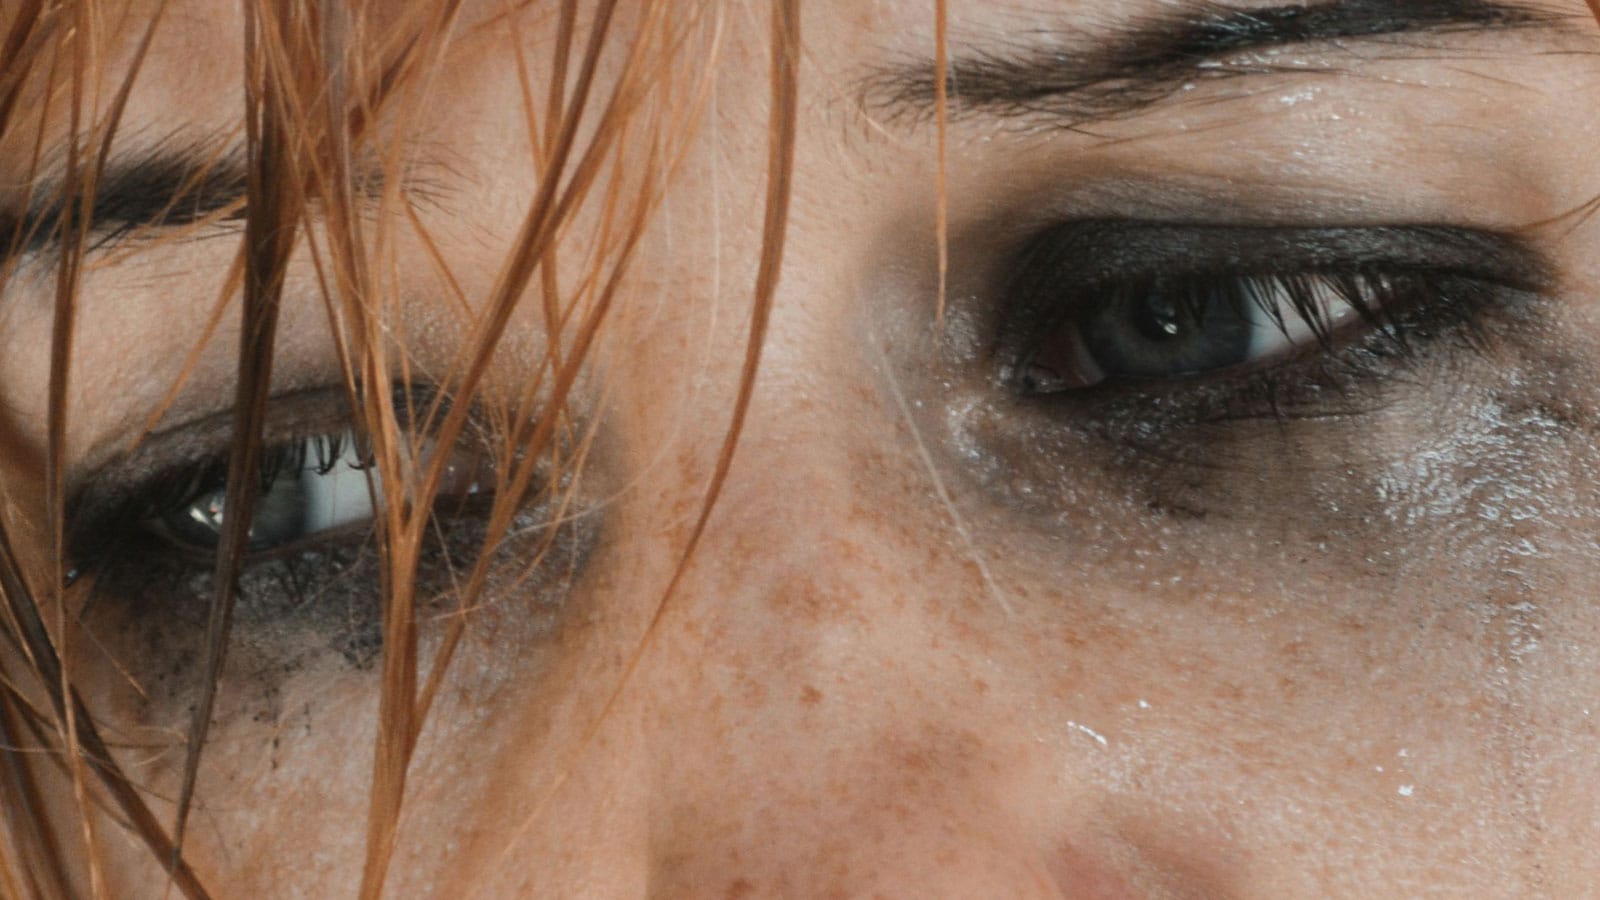 Closeup of weeping redhead's eyes with makeup running 